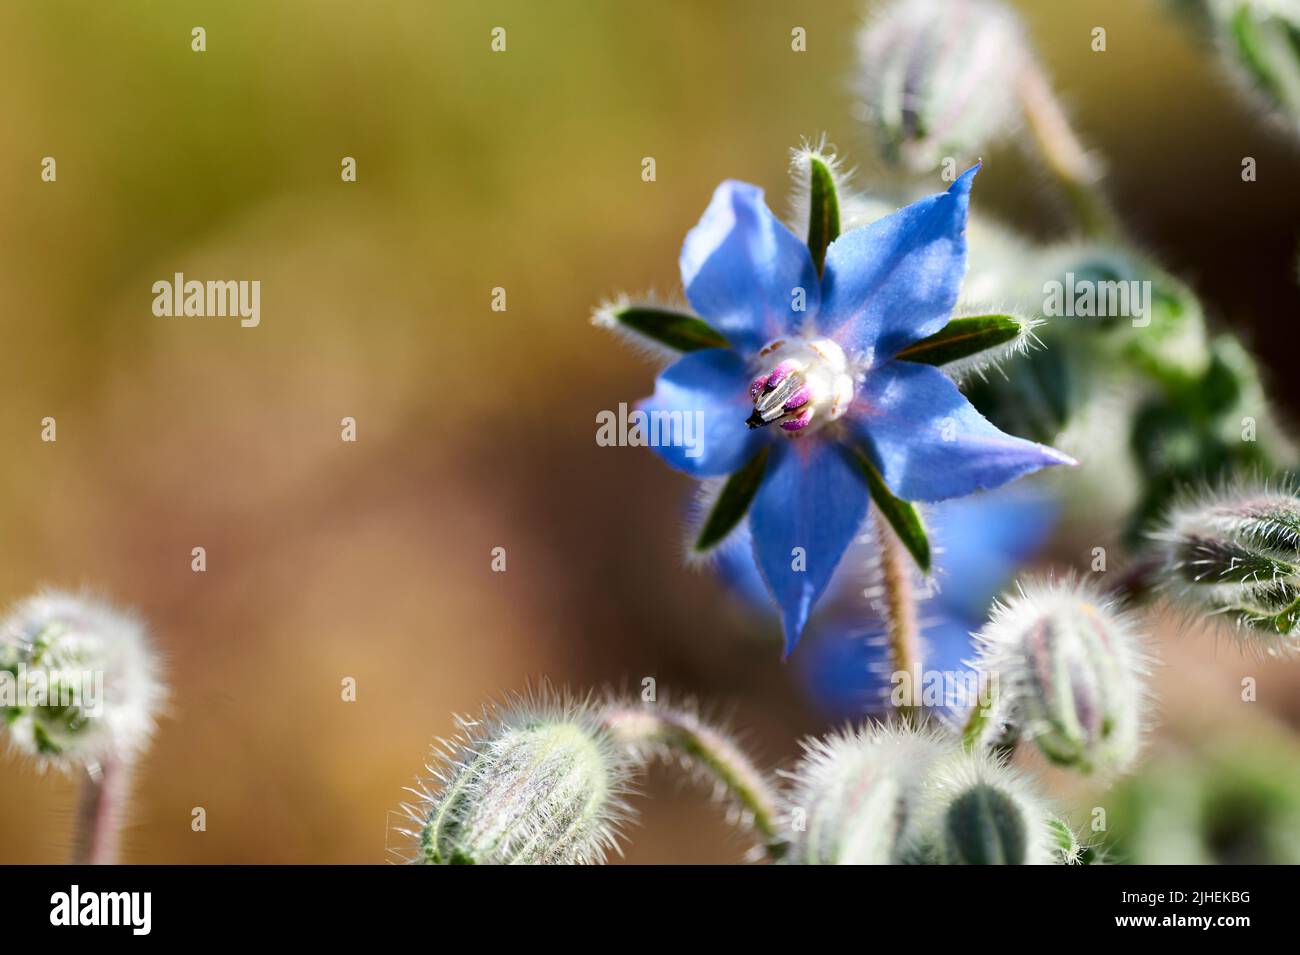 Borage Borago officinalis , also known as a starflower, is an annual herb in the flowering plant family Boraginaceae. Borretsch. One blossom and Stock Photo